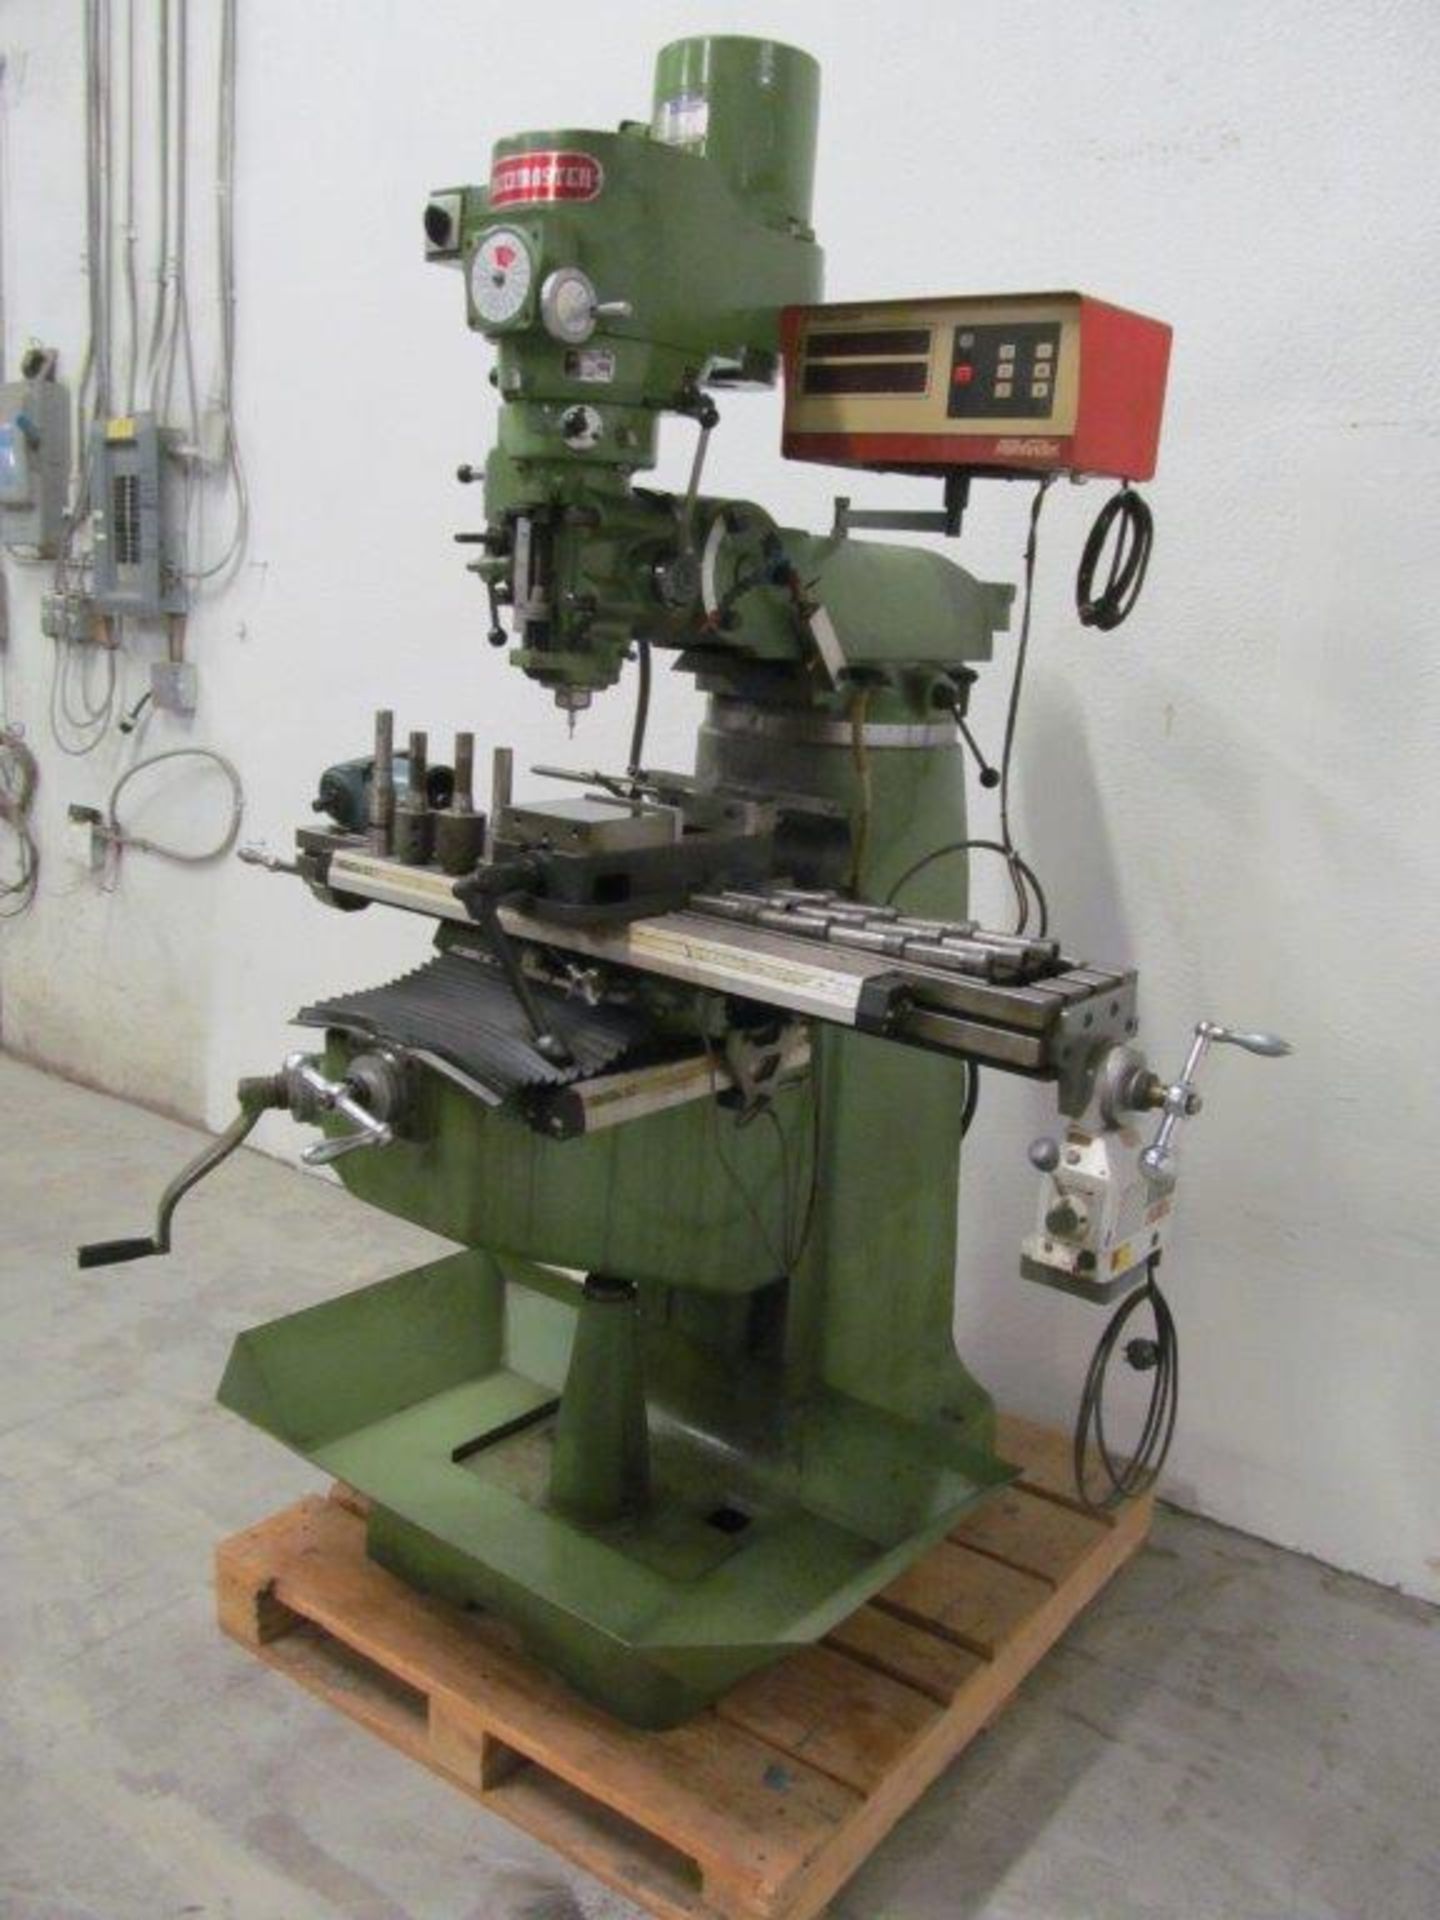 PRECIMASTER VERTICAL TURRET MILL, VARIABLE SPEED, MODEL: 2VS, S/N: 01015R, TABLE: 9" X 48", C/W DRO, - Image 3 of 5